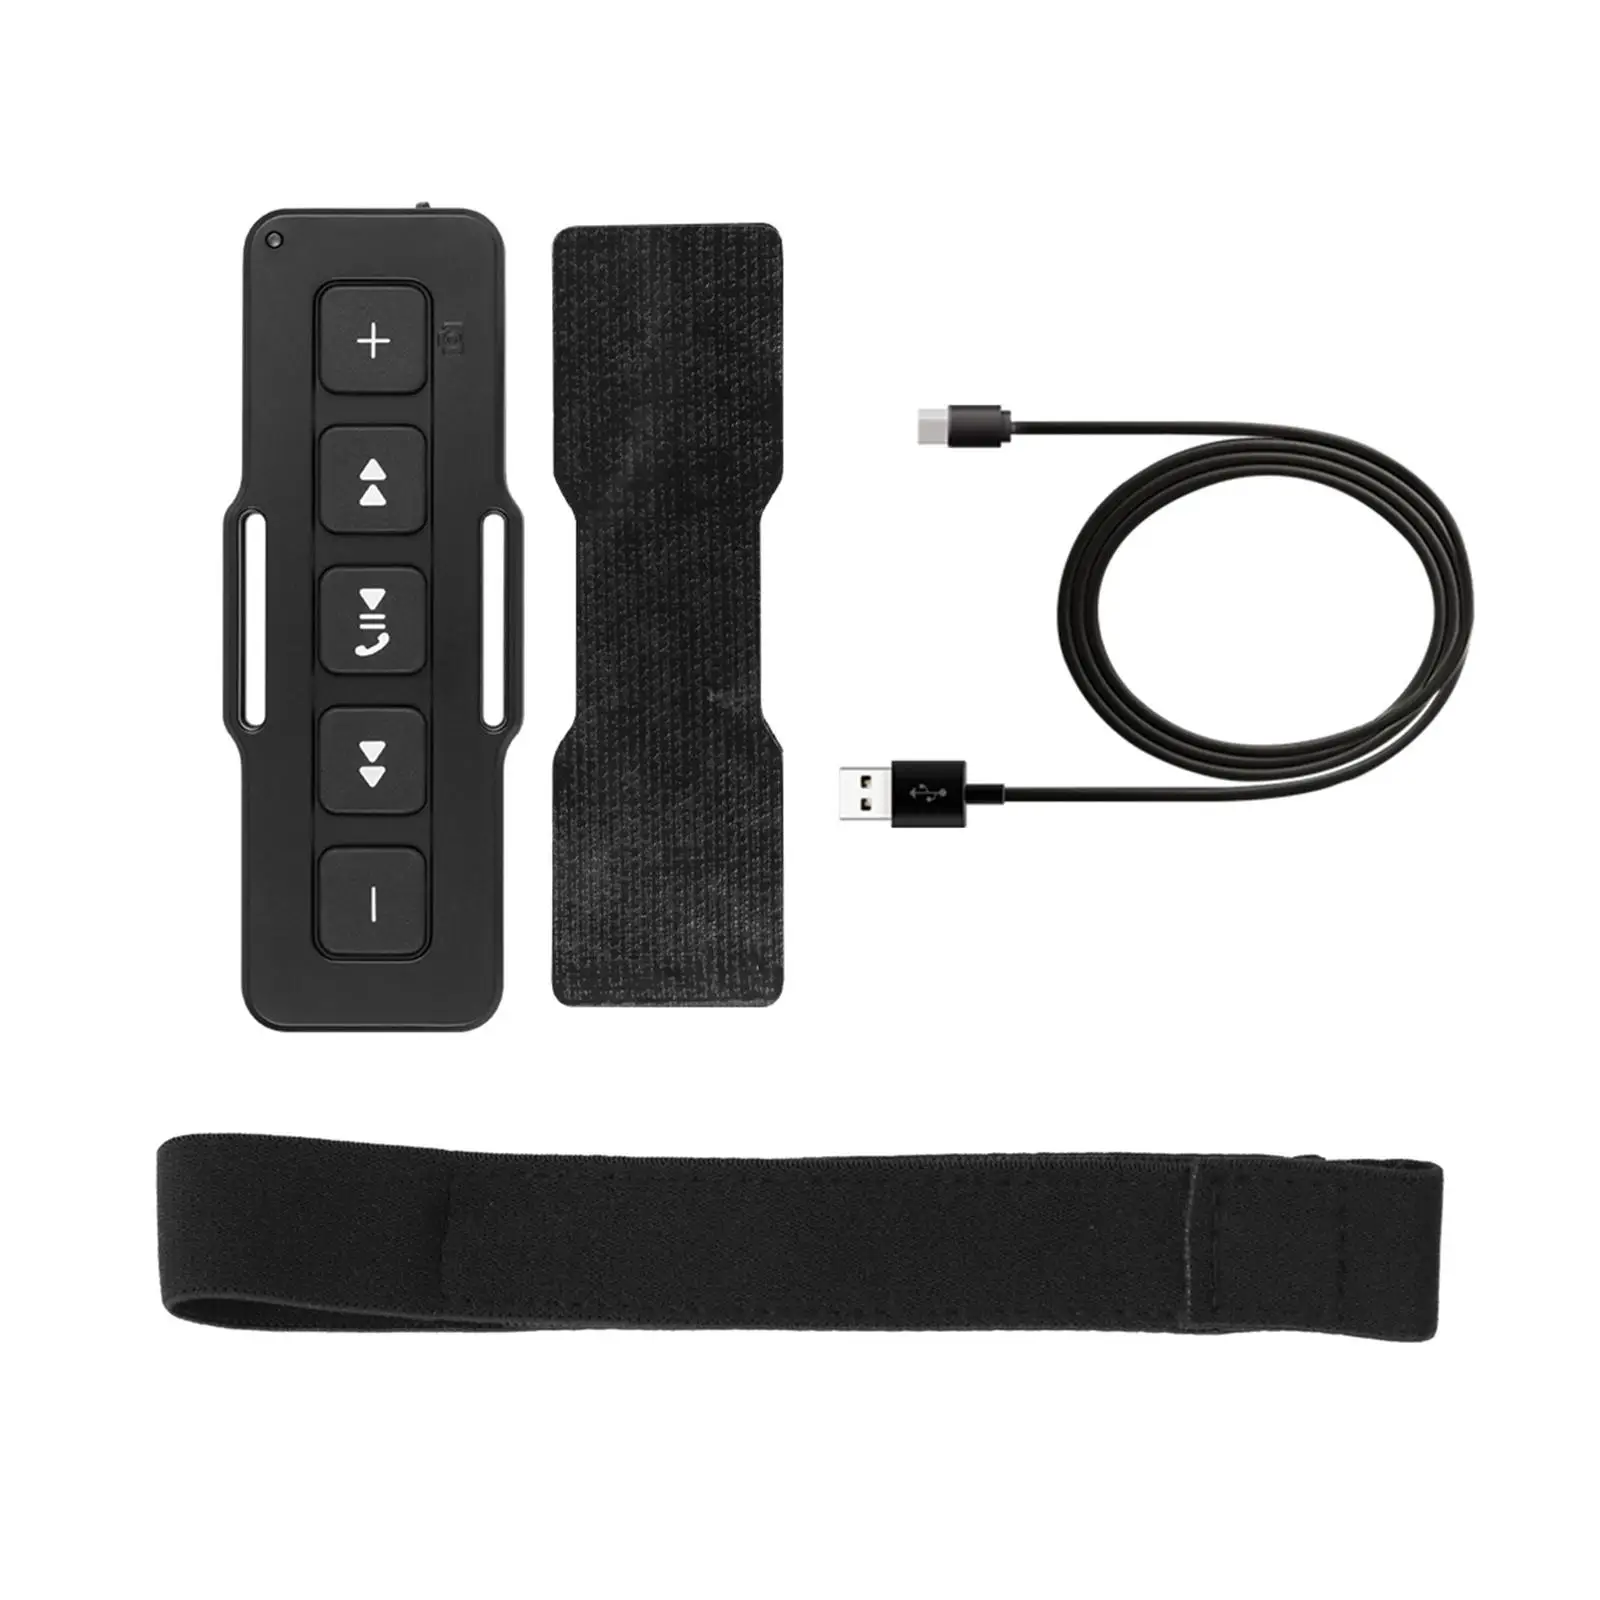 with Bandage Car Remote Controller 5 Button Waterproof Music Control USB Bike Handlebar Media Control for Outdoors Hiking